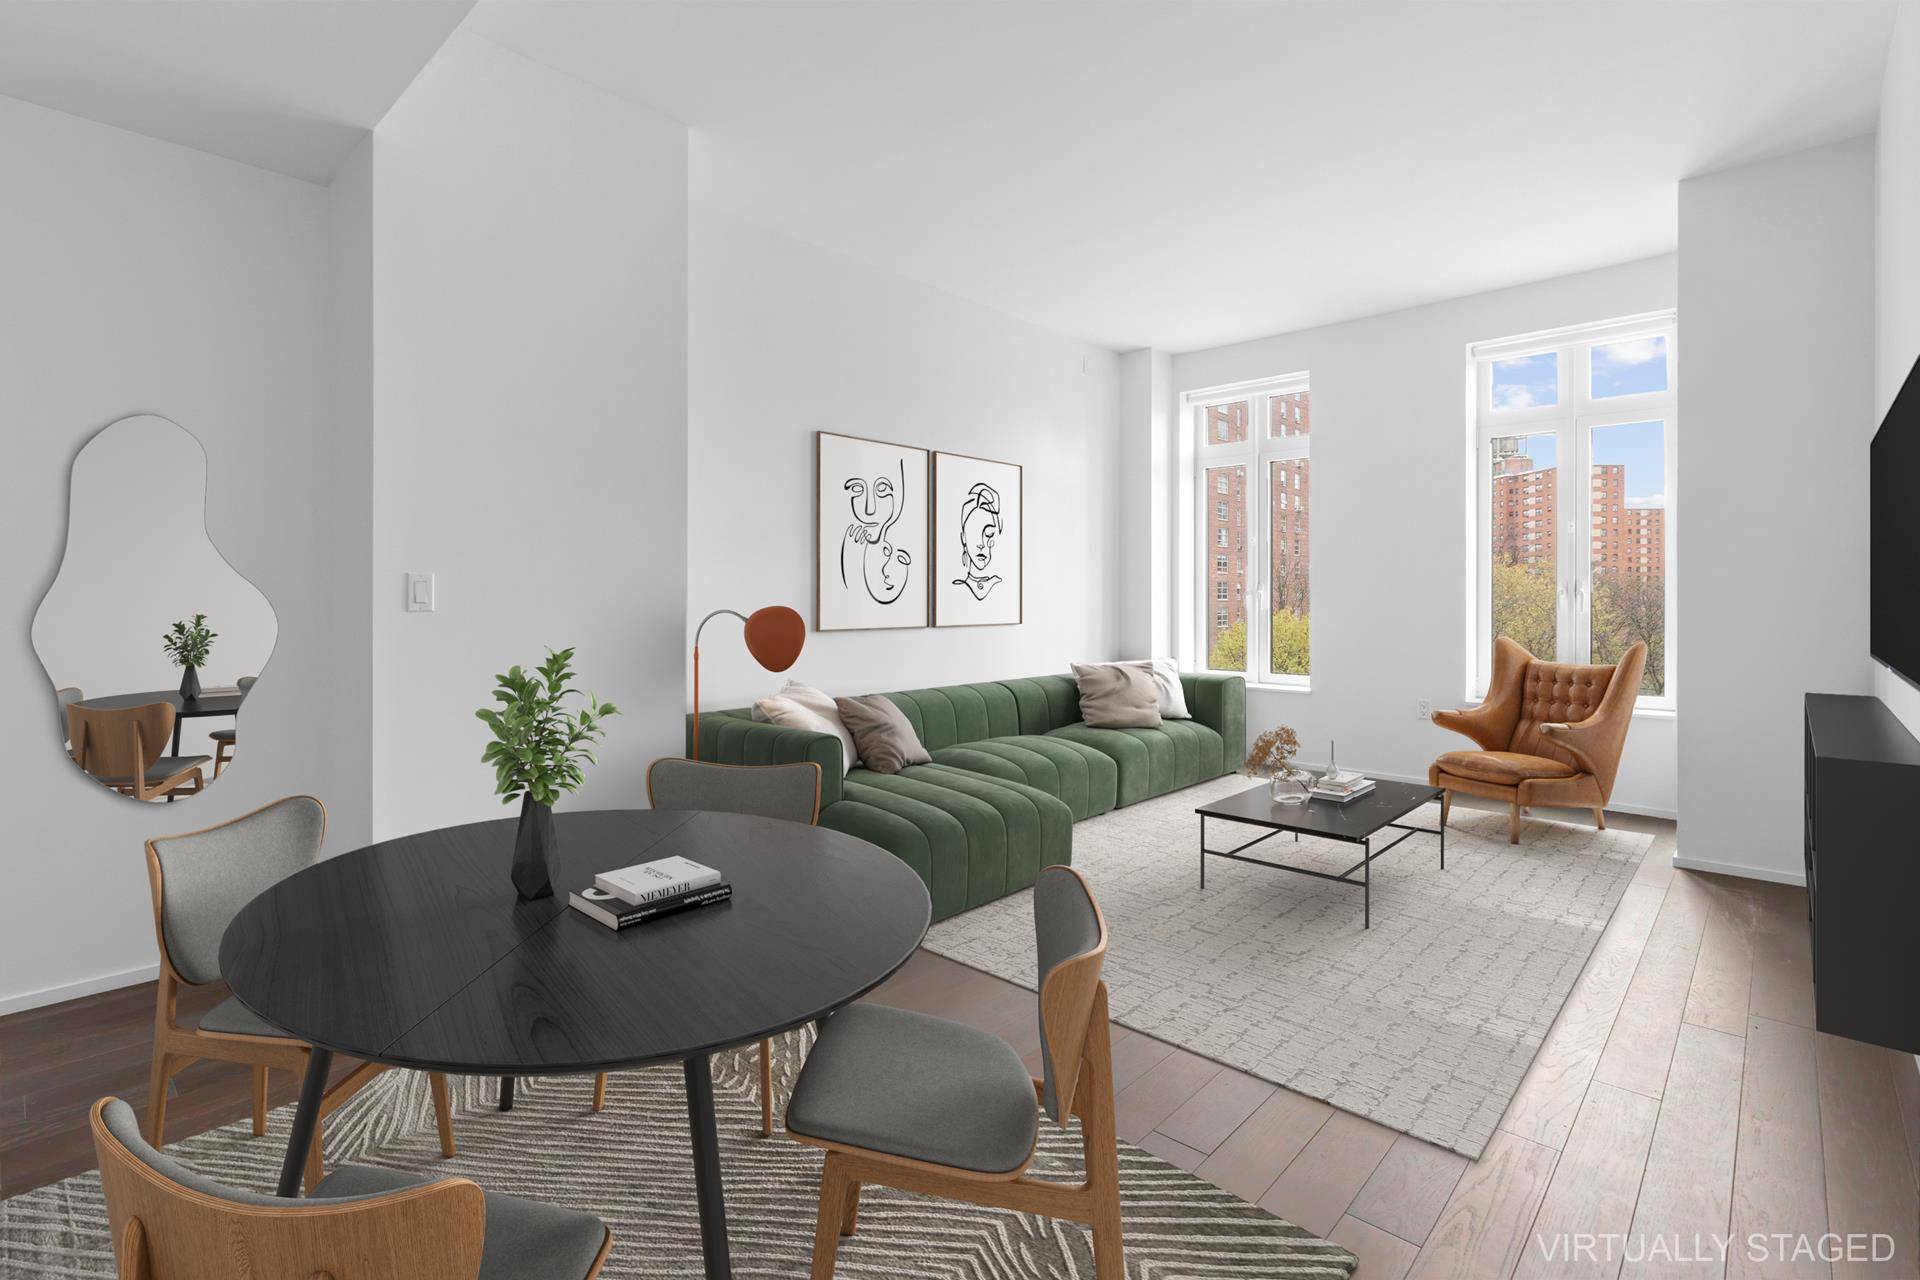 This spacious 831 sq ft one bedroom apartment is located within the academic hub of Morningside Heights and features a large foyer, an open kitchen, and two oversized closets.